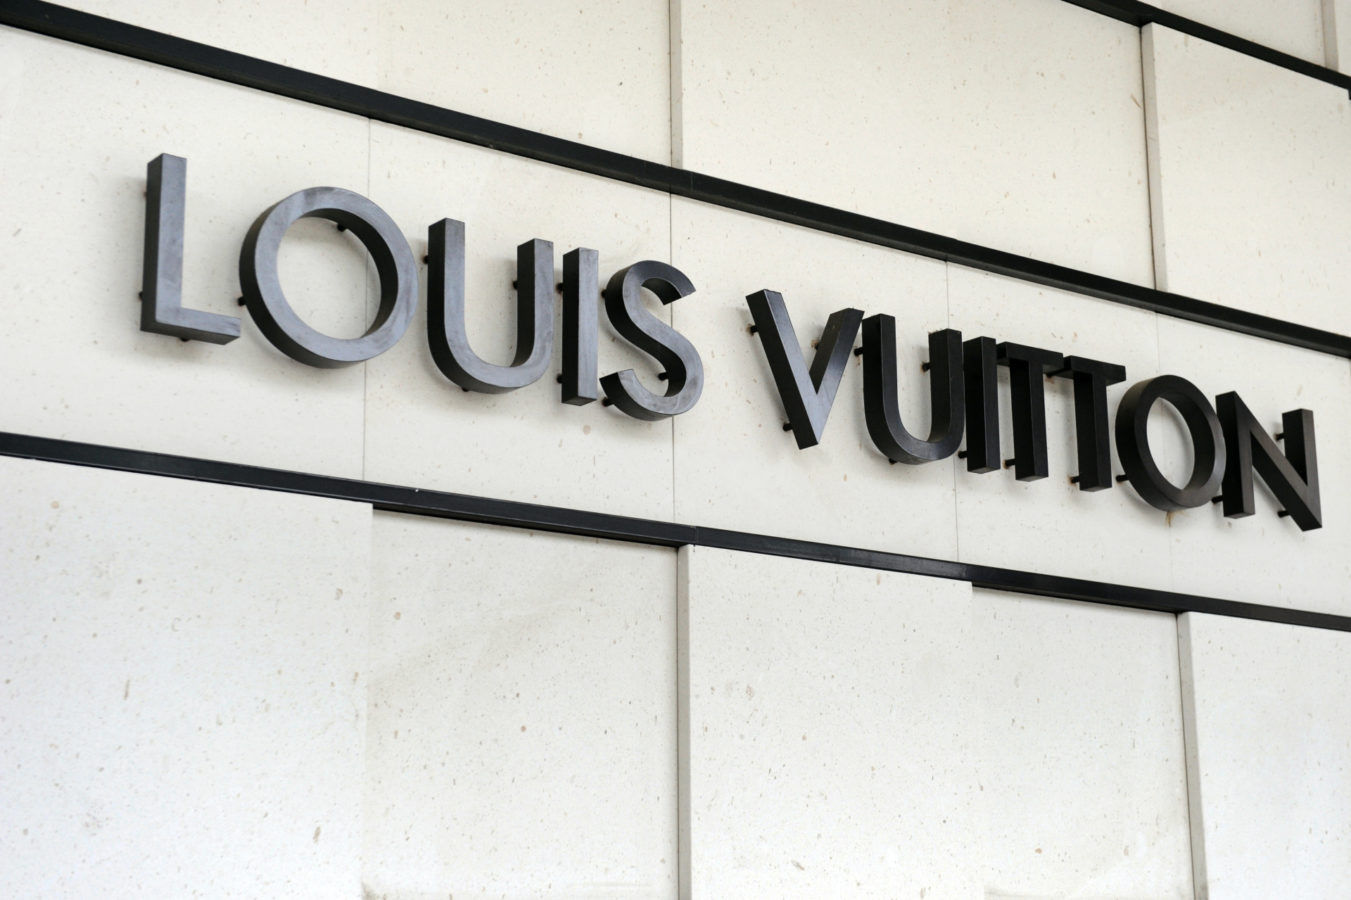 Louis Vuitton Is Opening First Ever Restaurant & Cafe in Japan